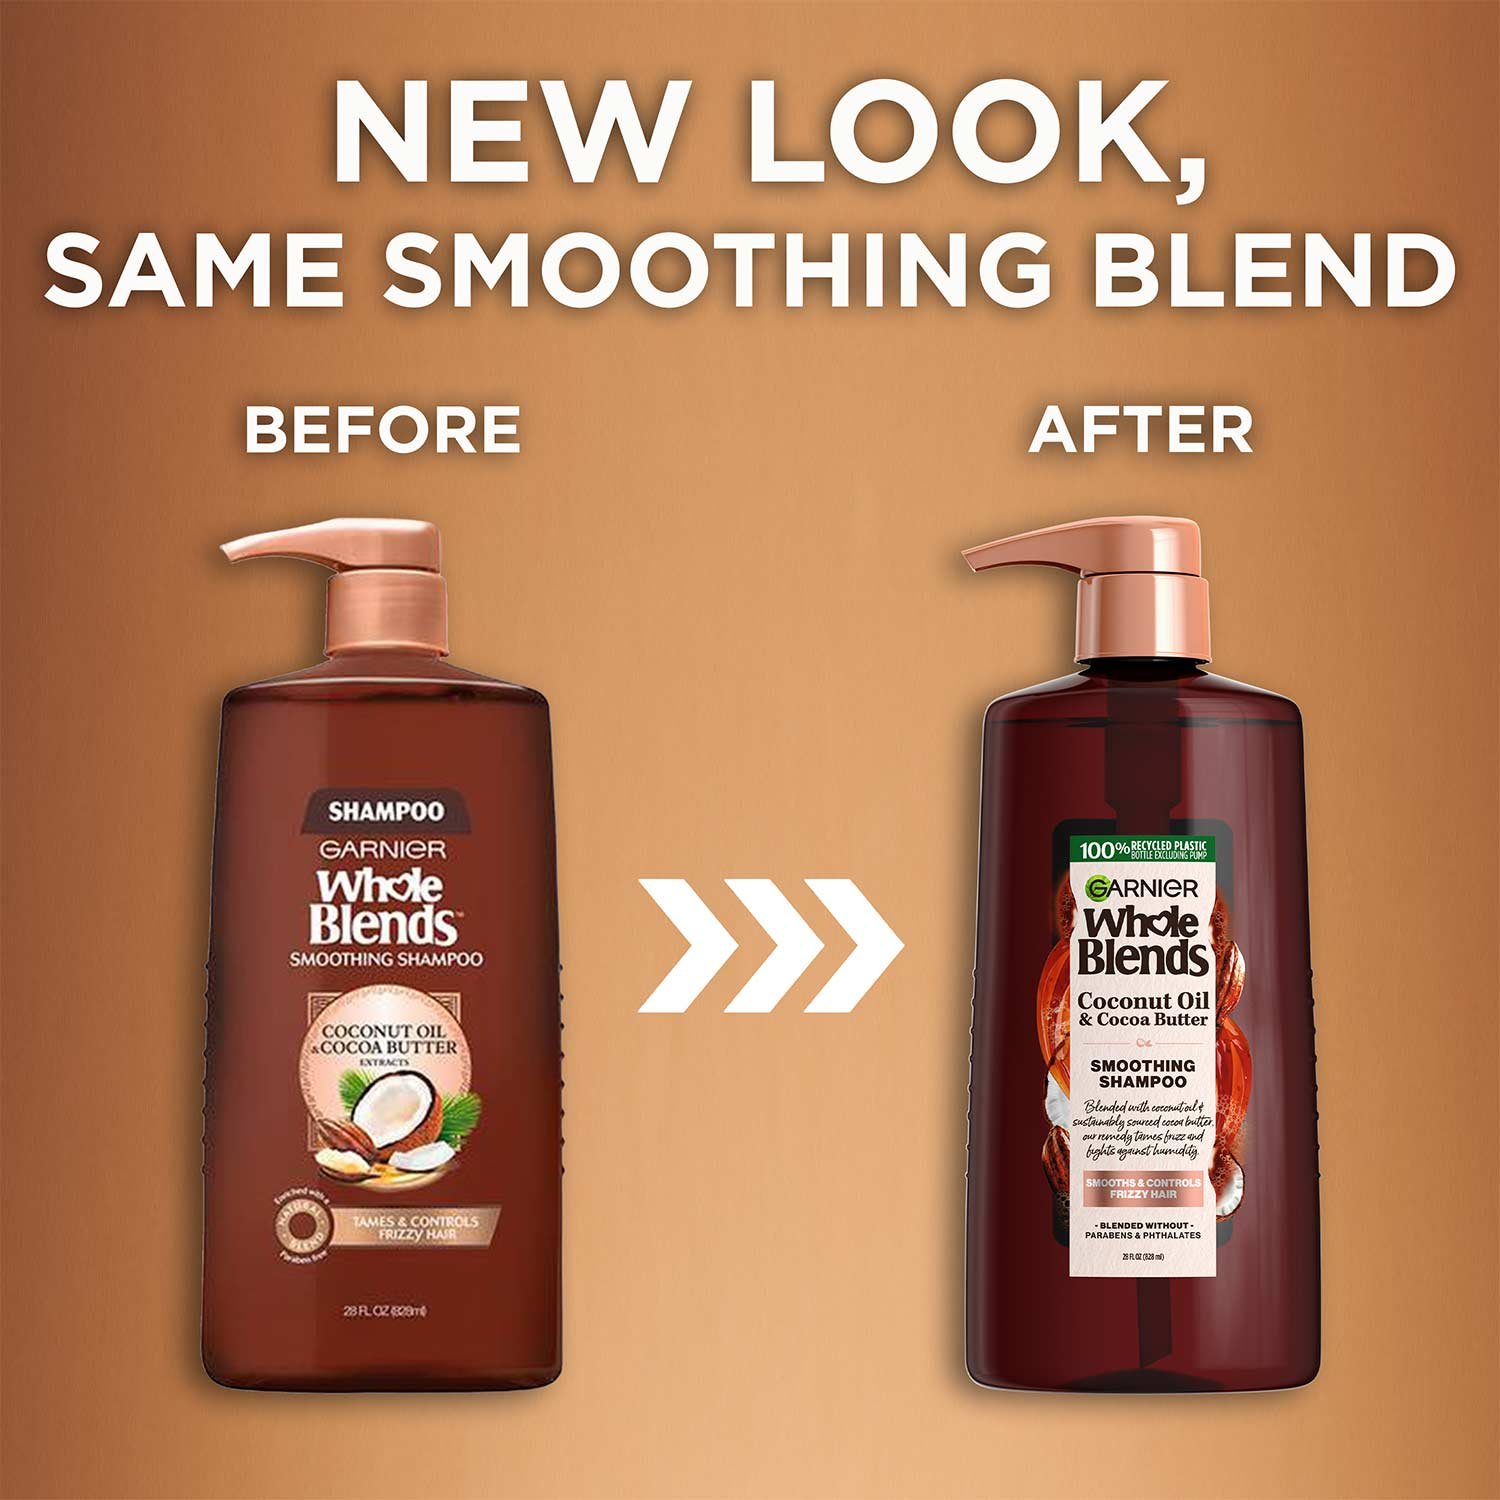 Whole Blends Coco Cocoa shampoo new look, same blend